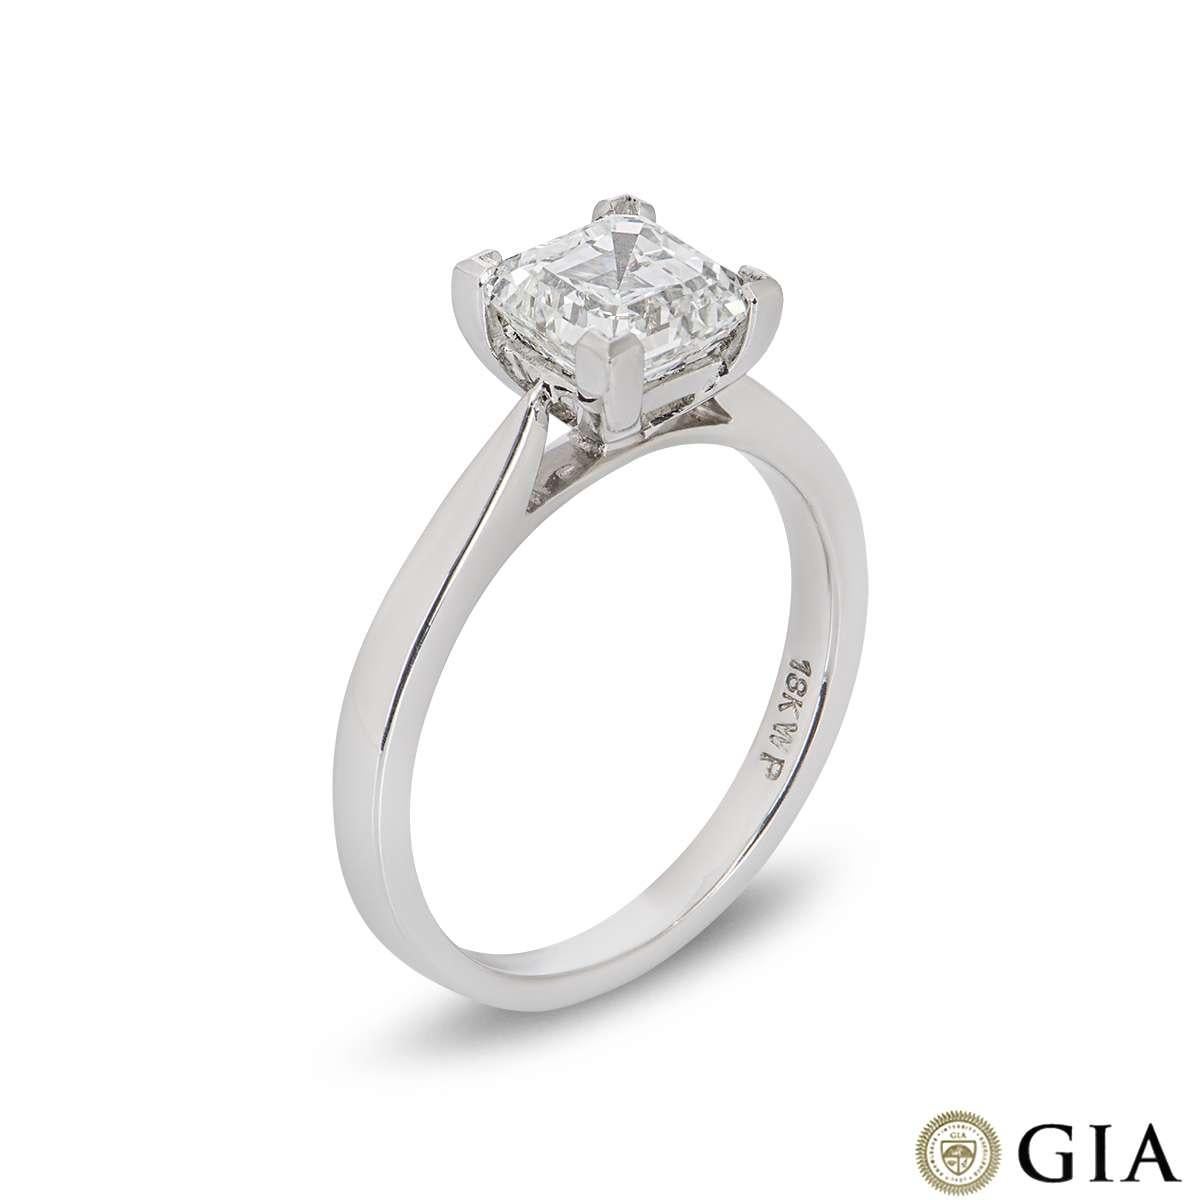 A gorgeous 18k white gold diamond ring. The ring is set to the centre with an asscher cut diamond weighing 1.58ct, G colour and VS clarity set within a classic four claw mount. The 2mm tapered ring is currently a UK size M1/2 /US size 6.25/ EU size